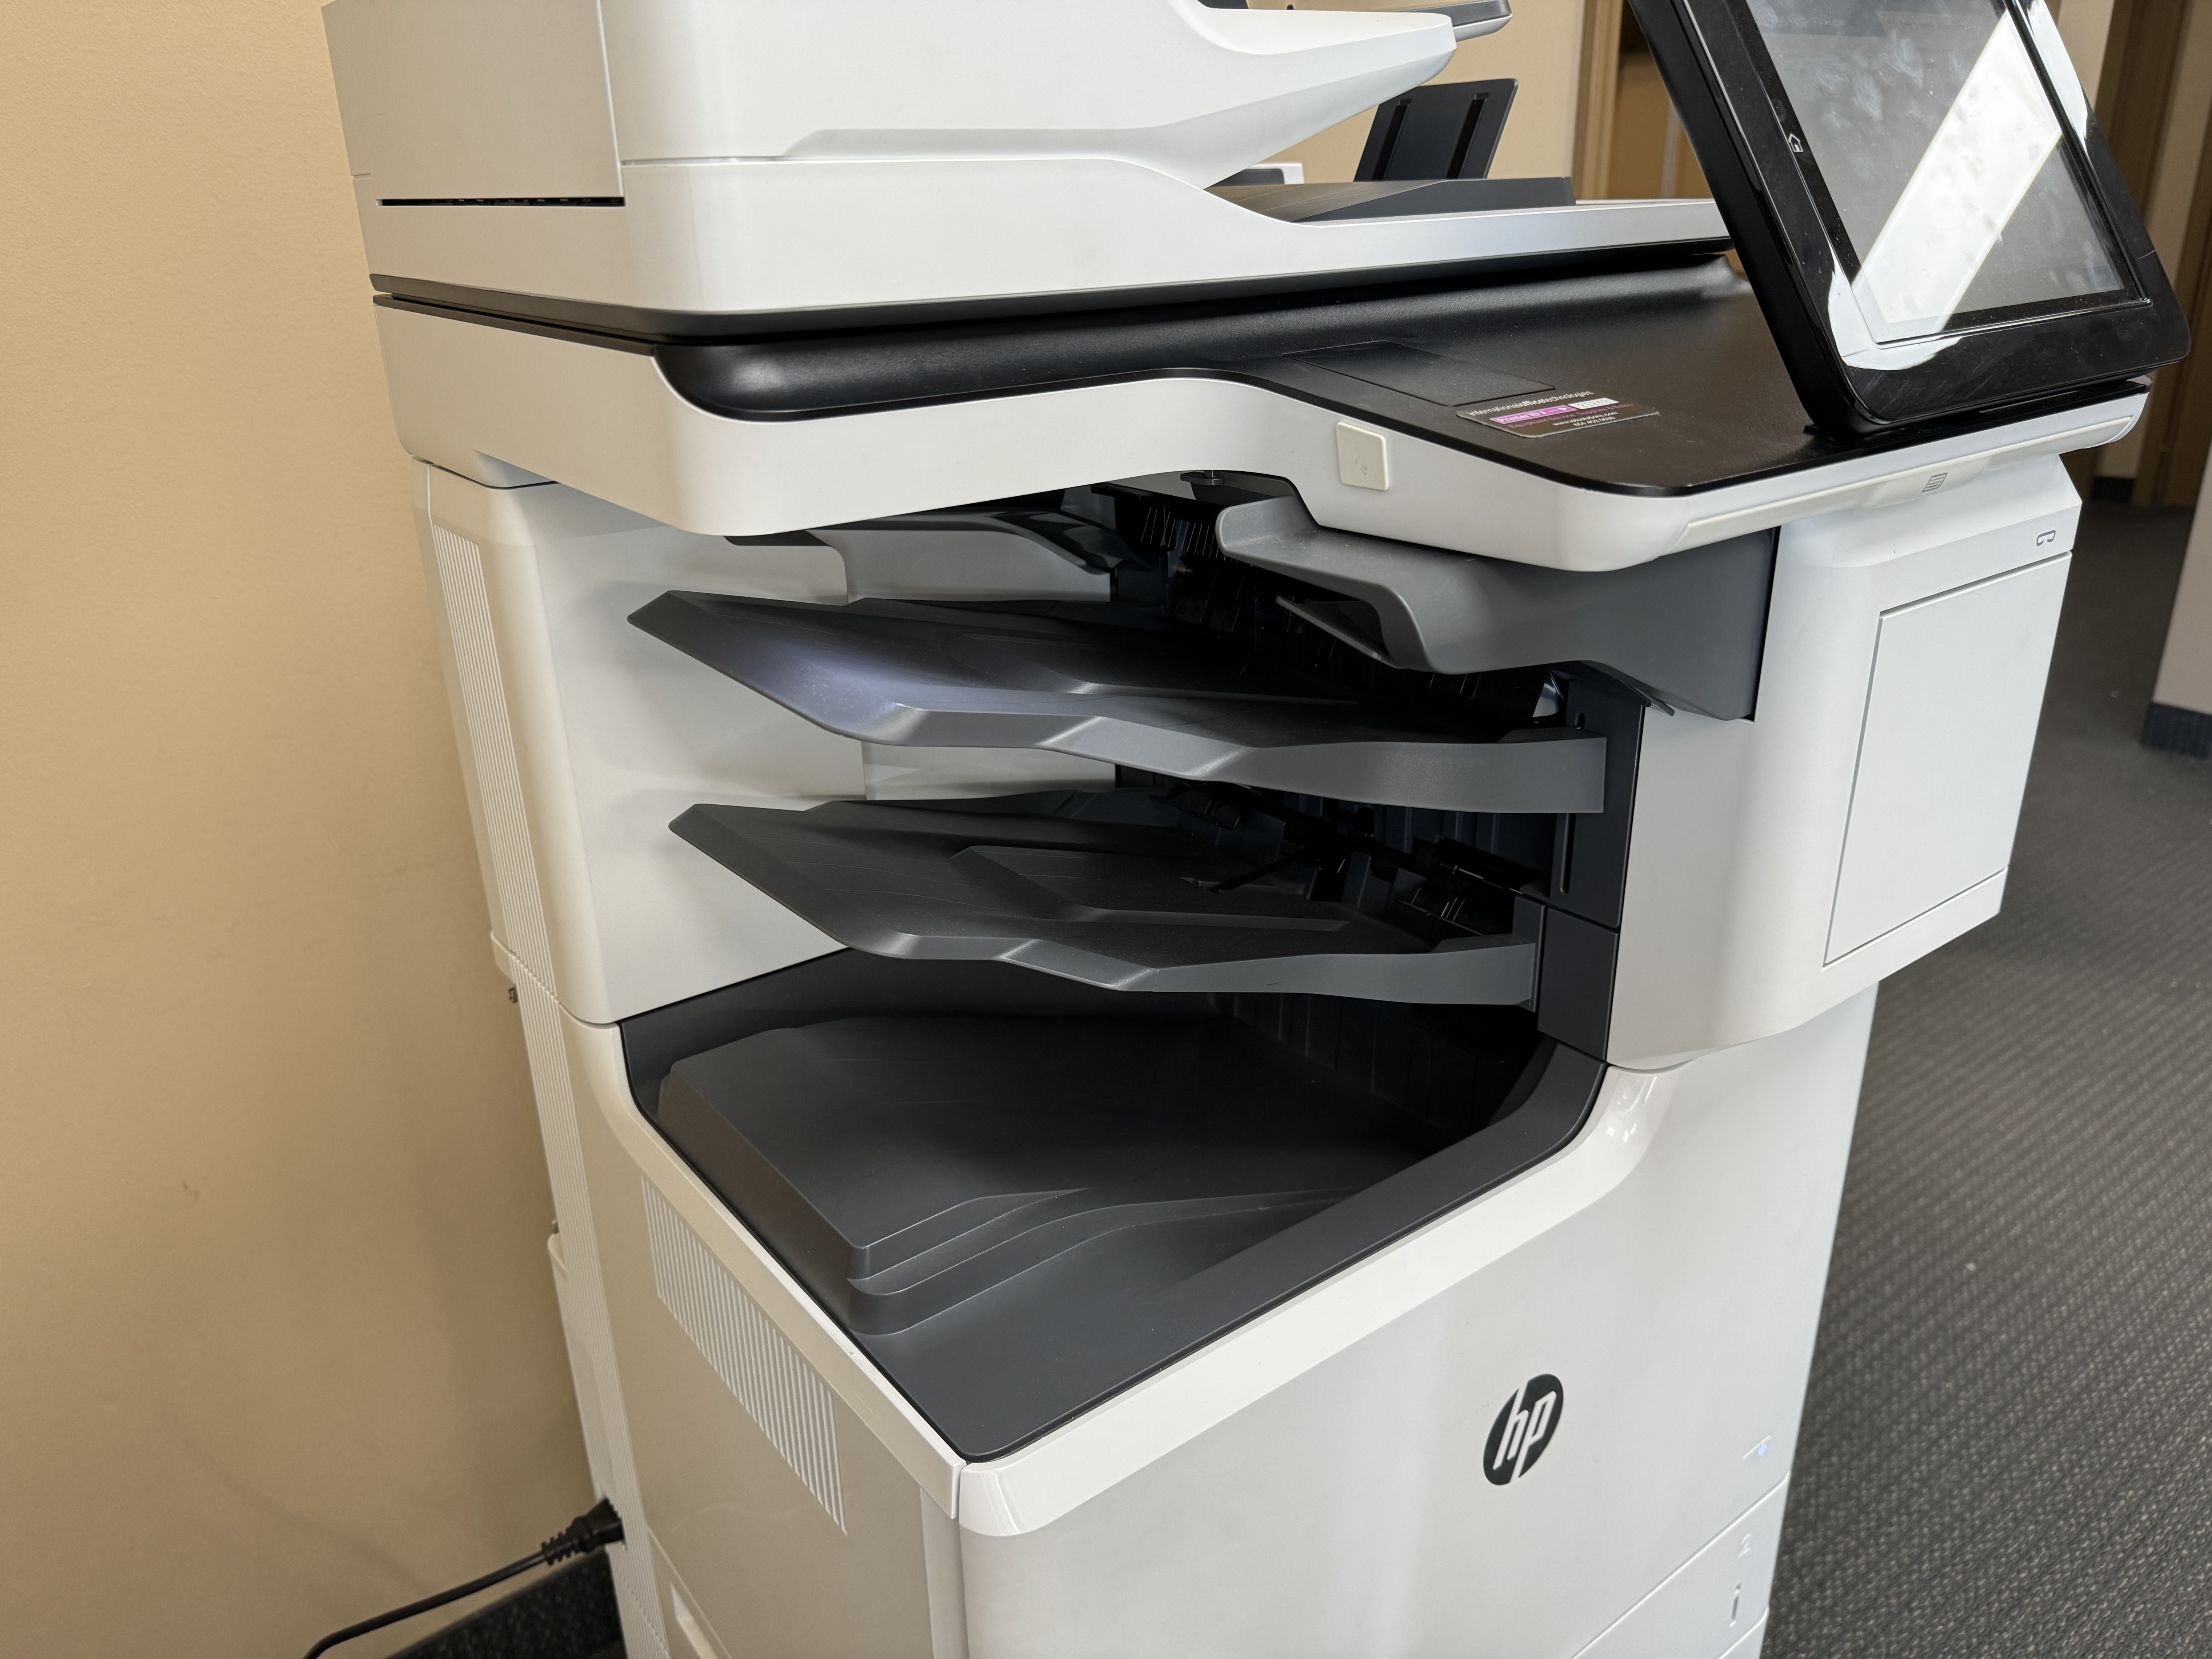 HP m682 color copier used in a used IOT copier lease. 